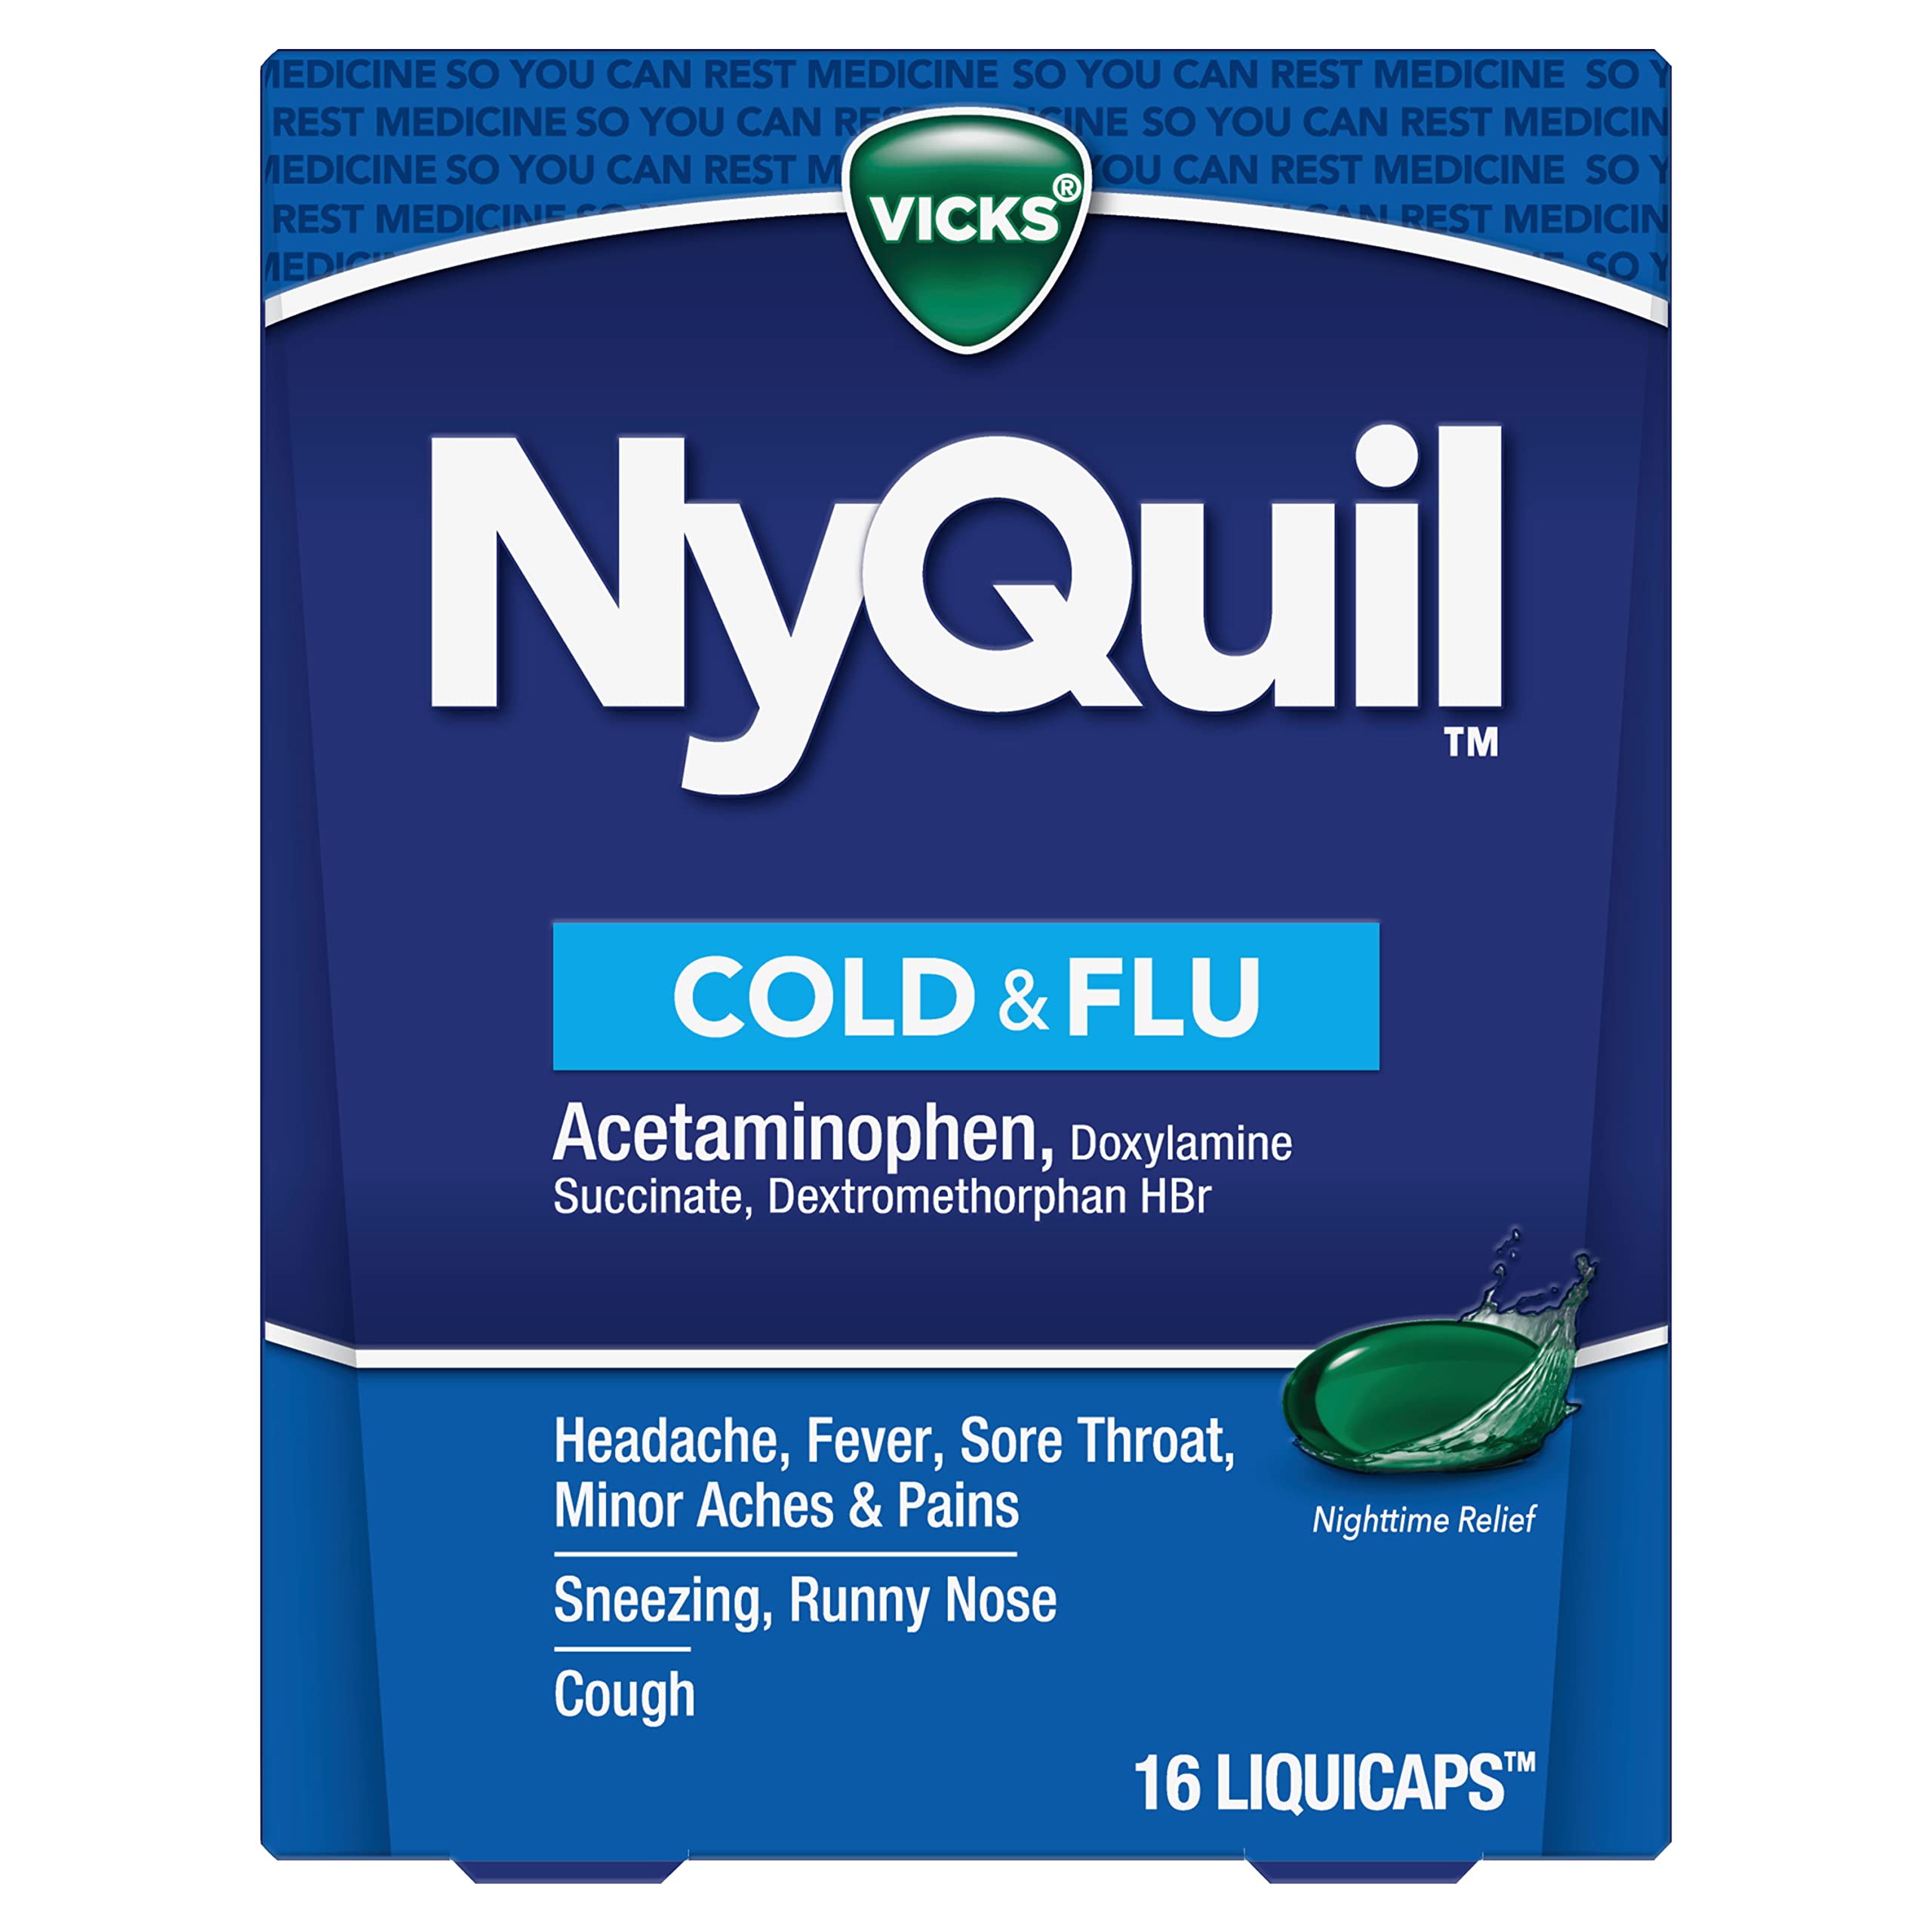 Vicks Nyquil Cold and Flu Nighttime Relief Liquid Capsules, 16 Count (Pack of 2)